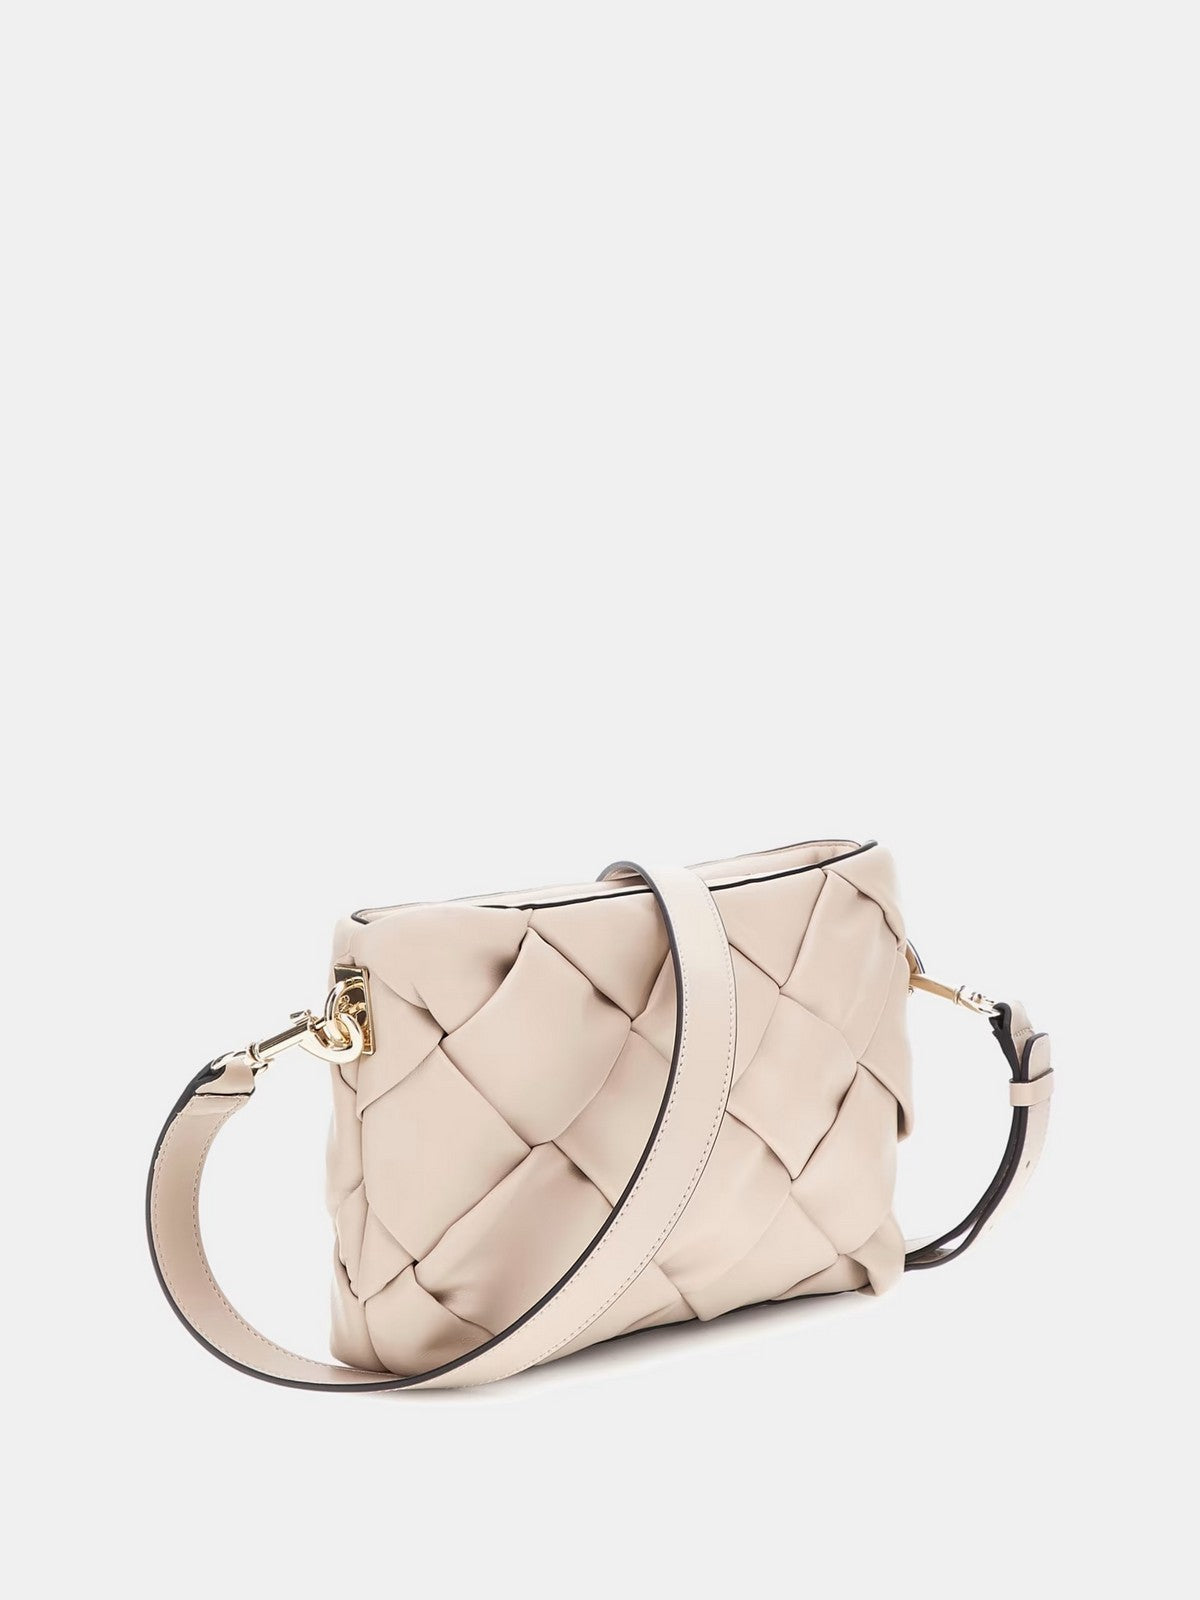 Sac pour femmes GUESS HWWG89 86120 STO Beige